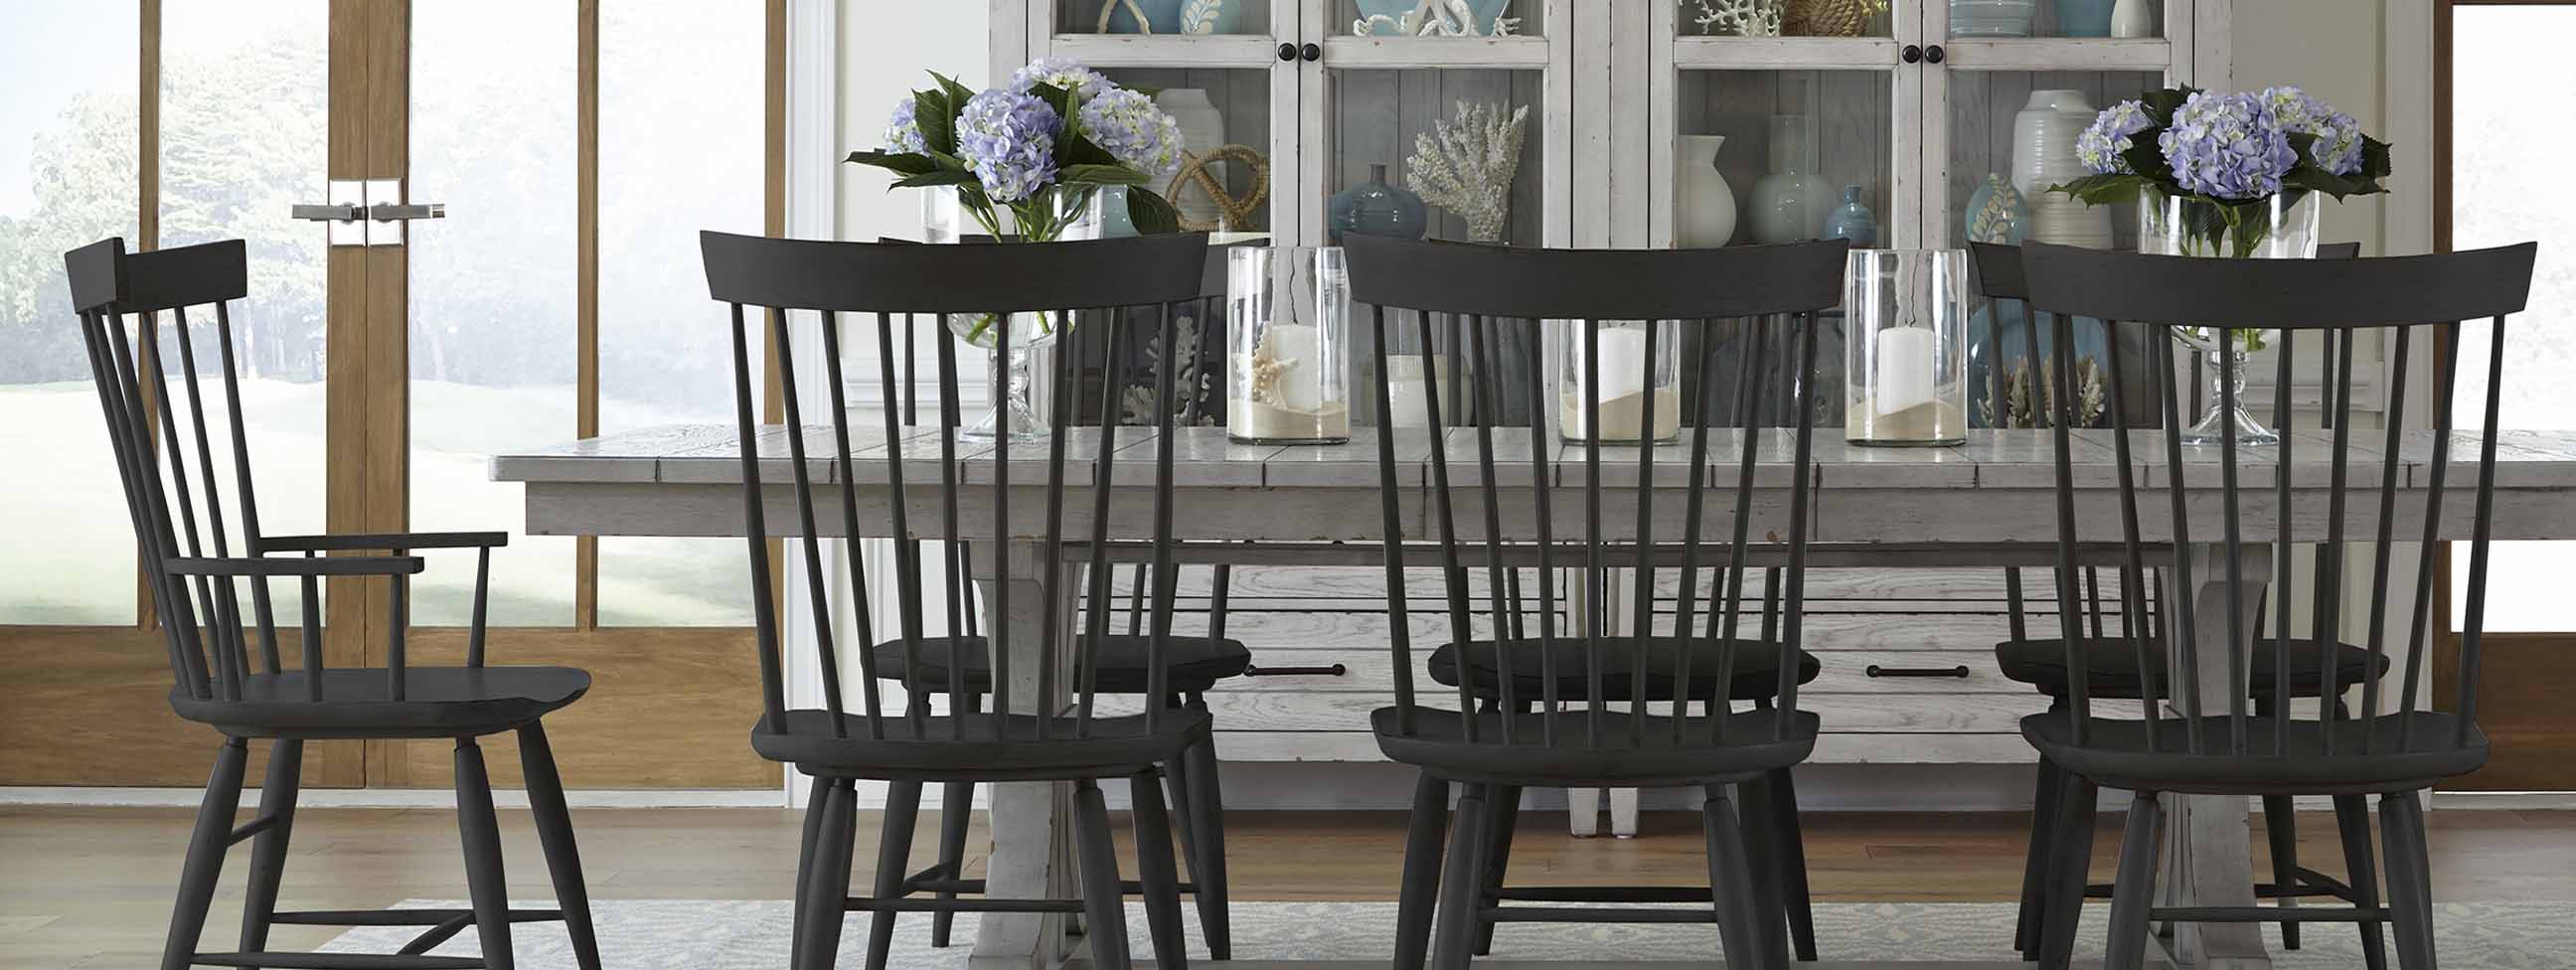 Belhaven Style Outdoor Dining Set